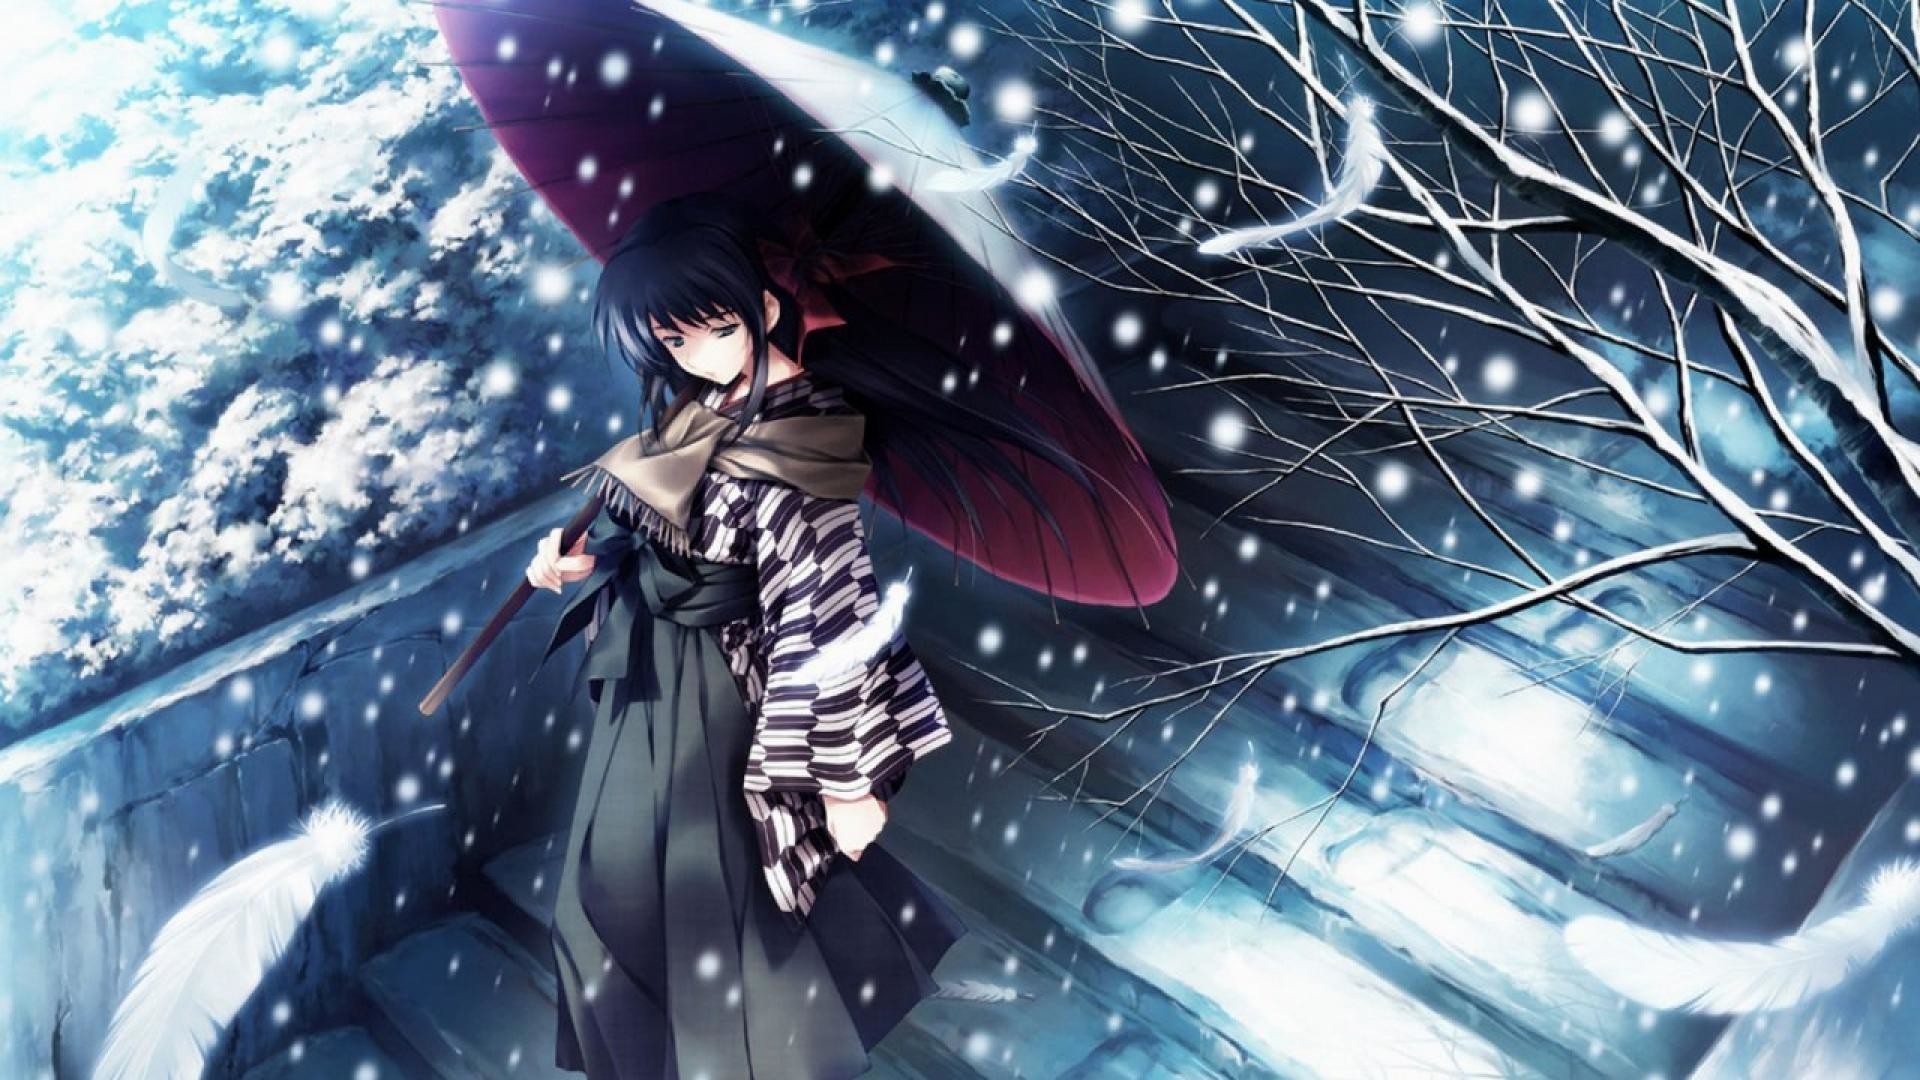 1920x1080 Winter-Girl-Anime-Wallpapers-HD-download-free